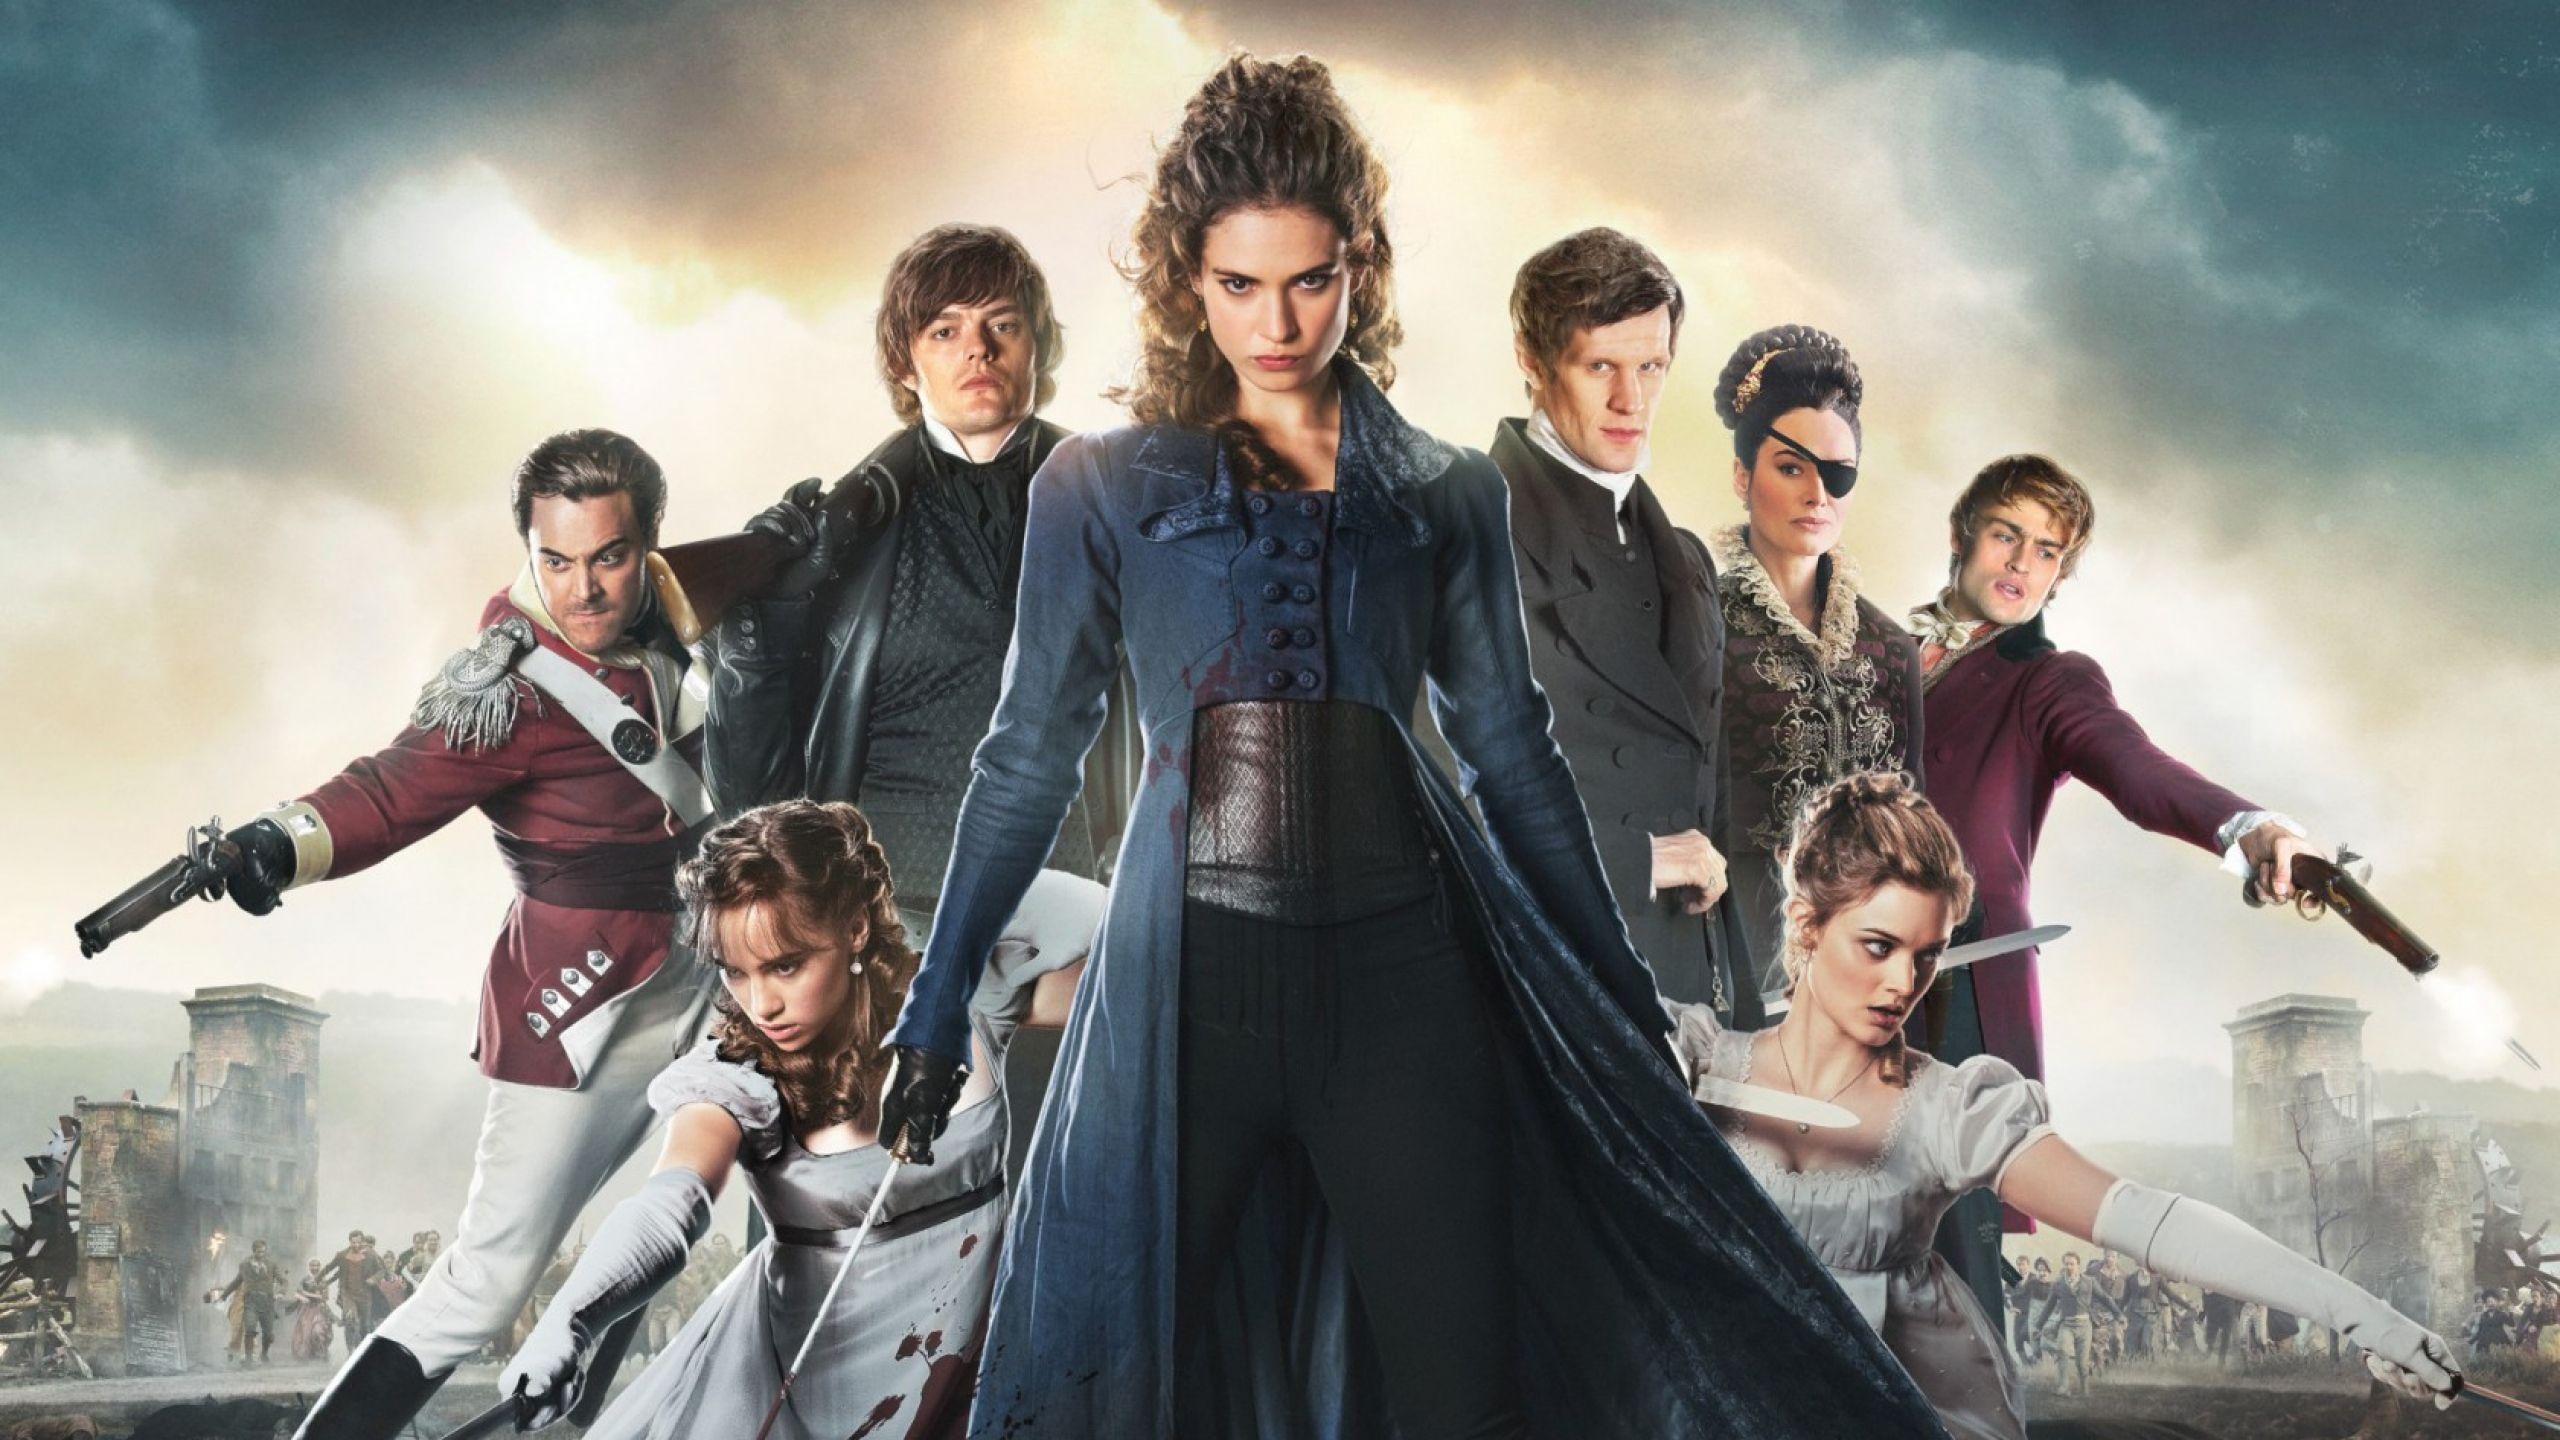 Download Wallpaper 2560x1440 Pride and prejudice and zombies, Lily